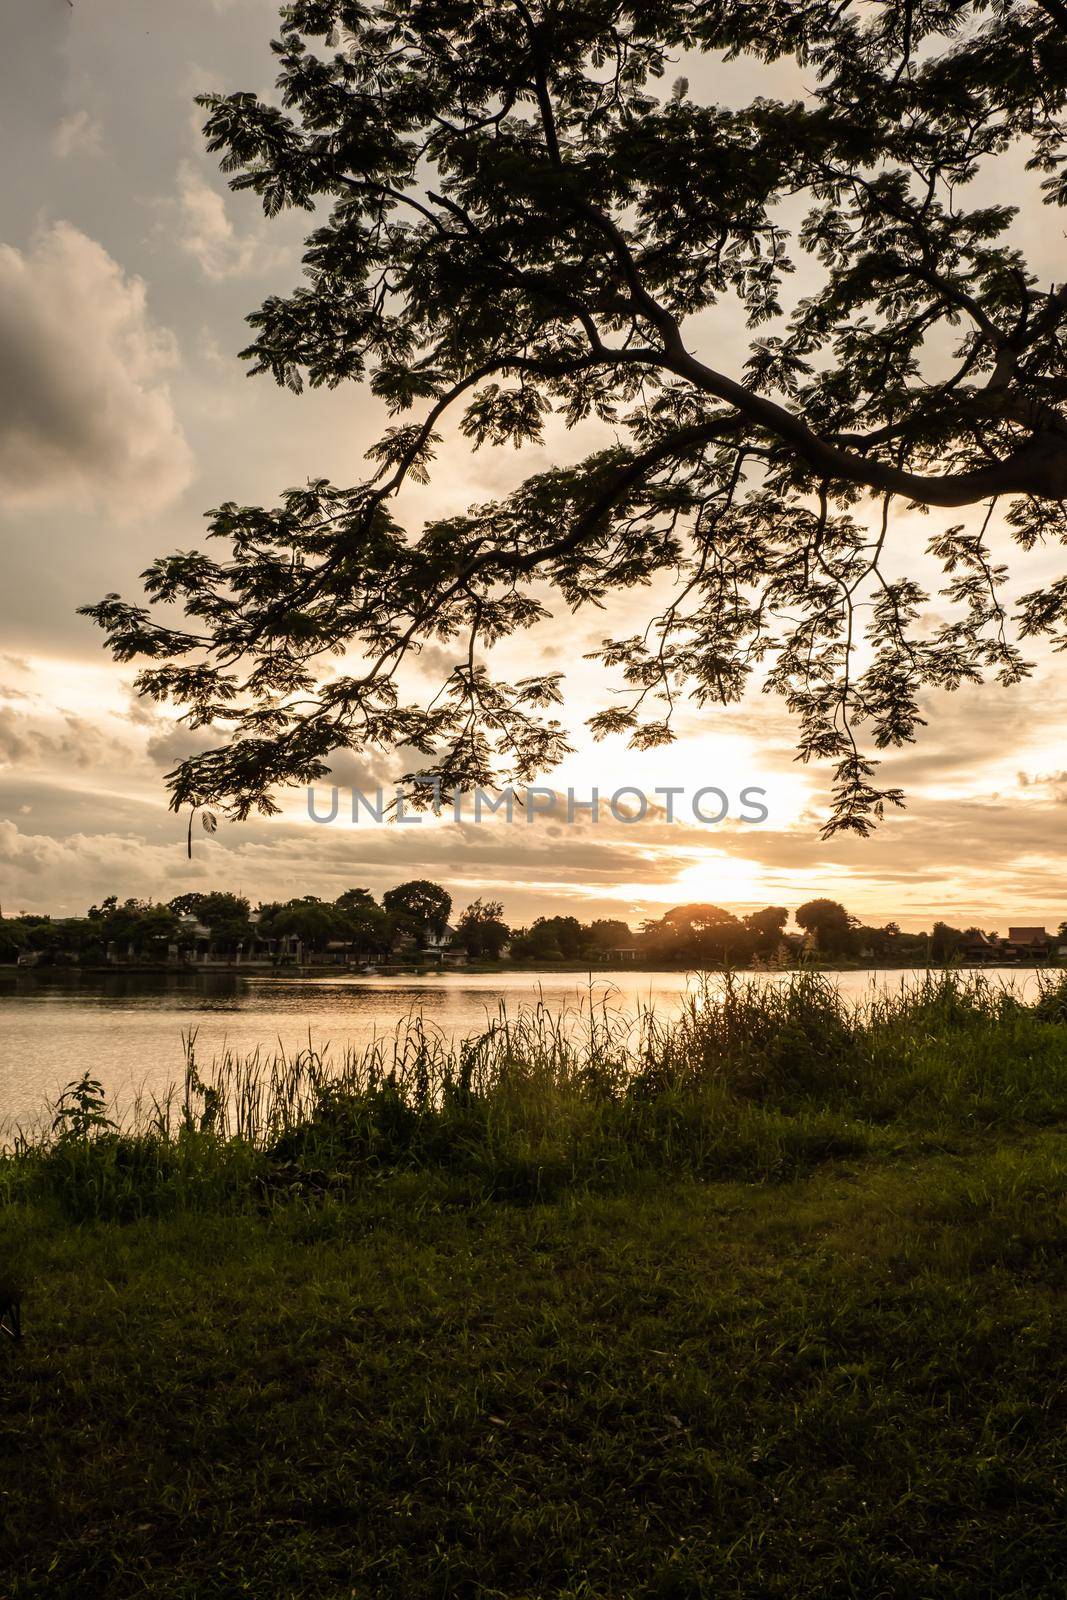 tree silhouette at sunset sky next nature river lake landscape nature background. by Petrichor